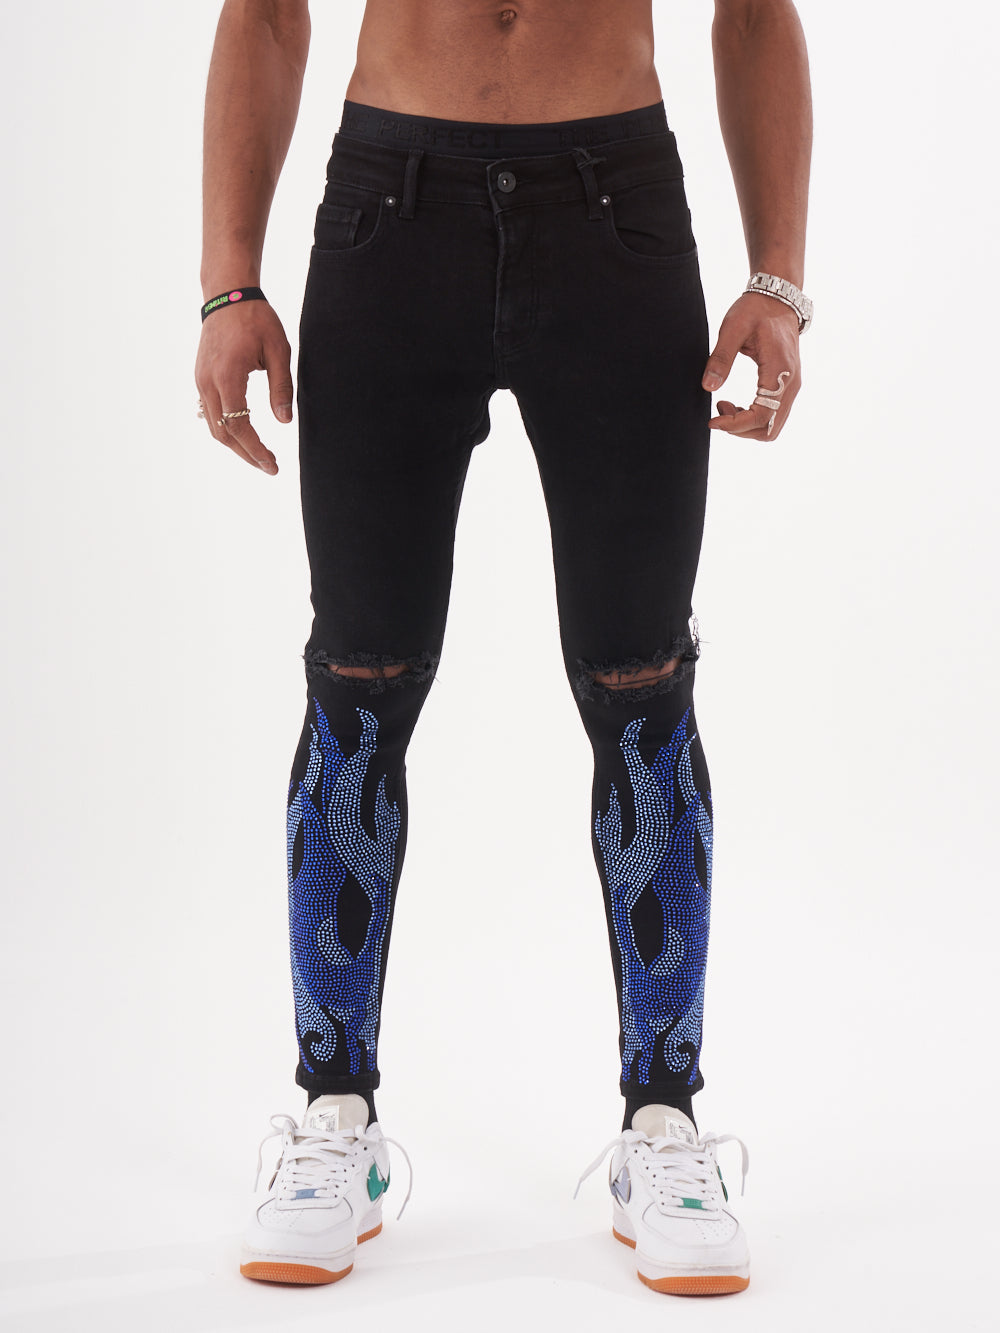 A man wearing HELLFIRE | BLUE jeans with blue flames on them.